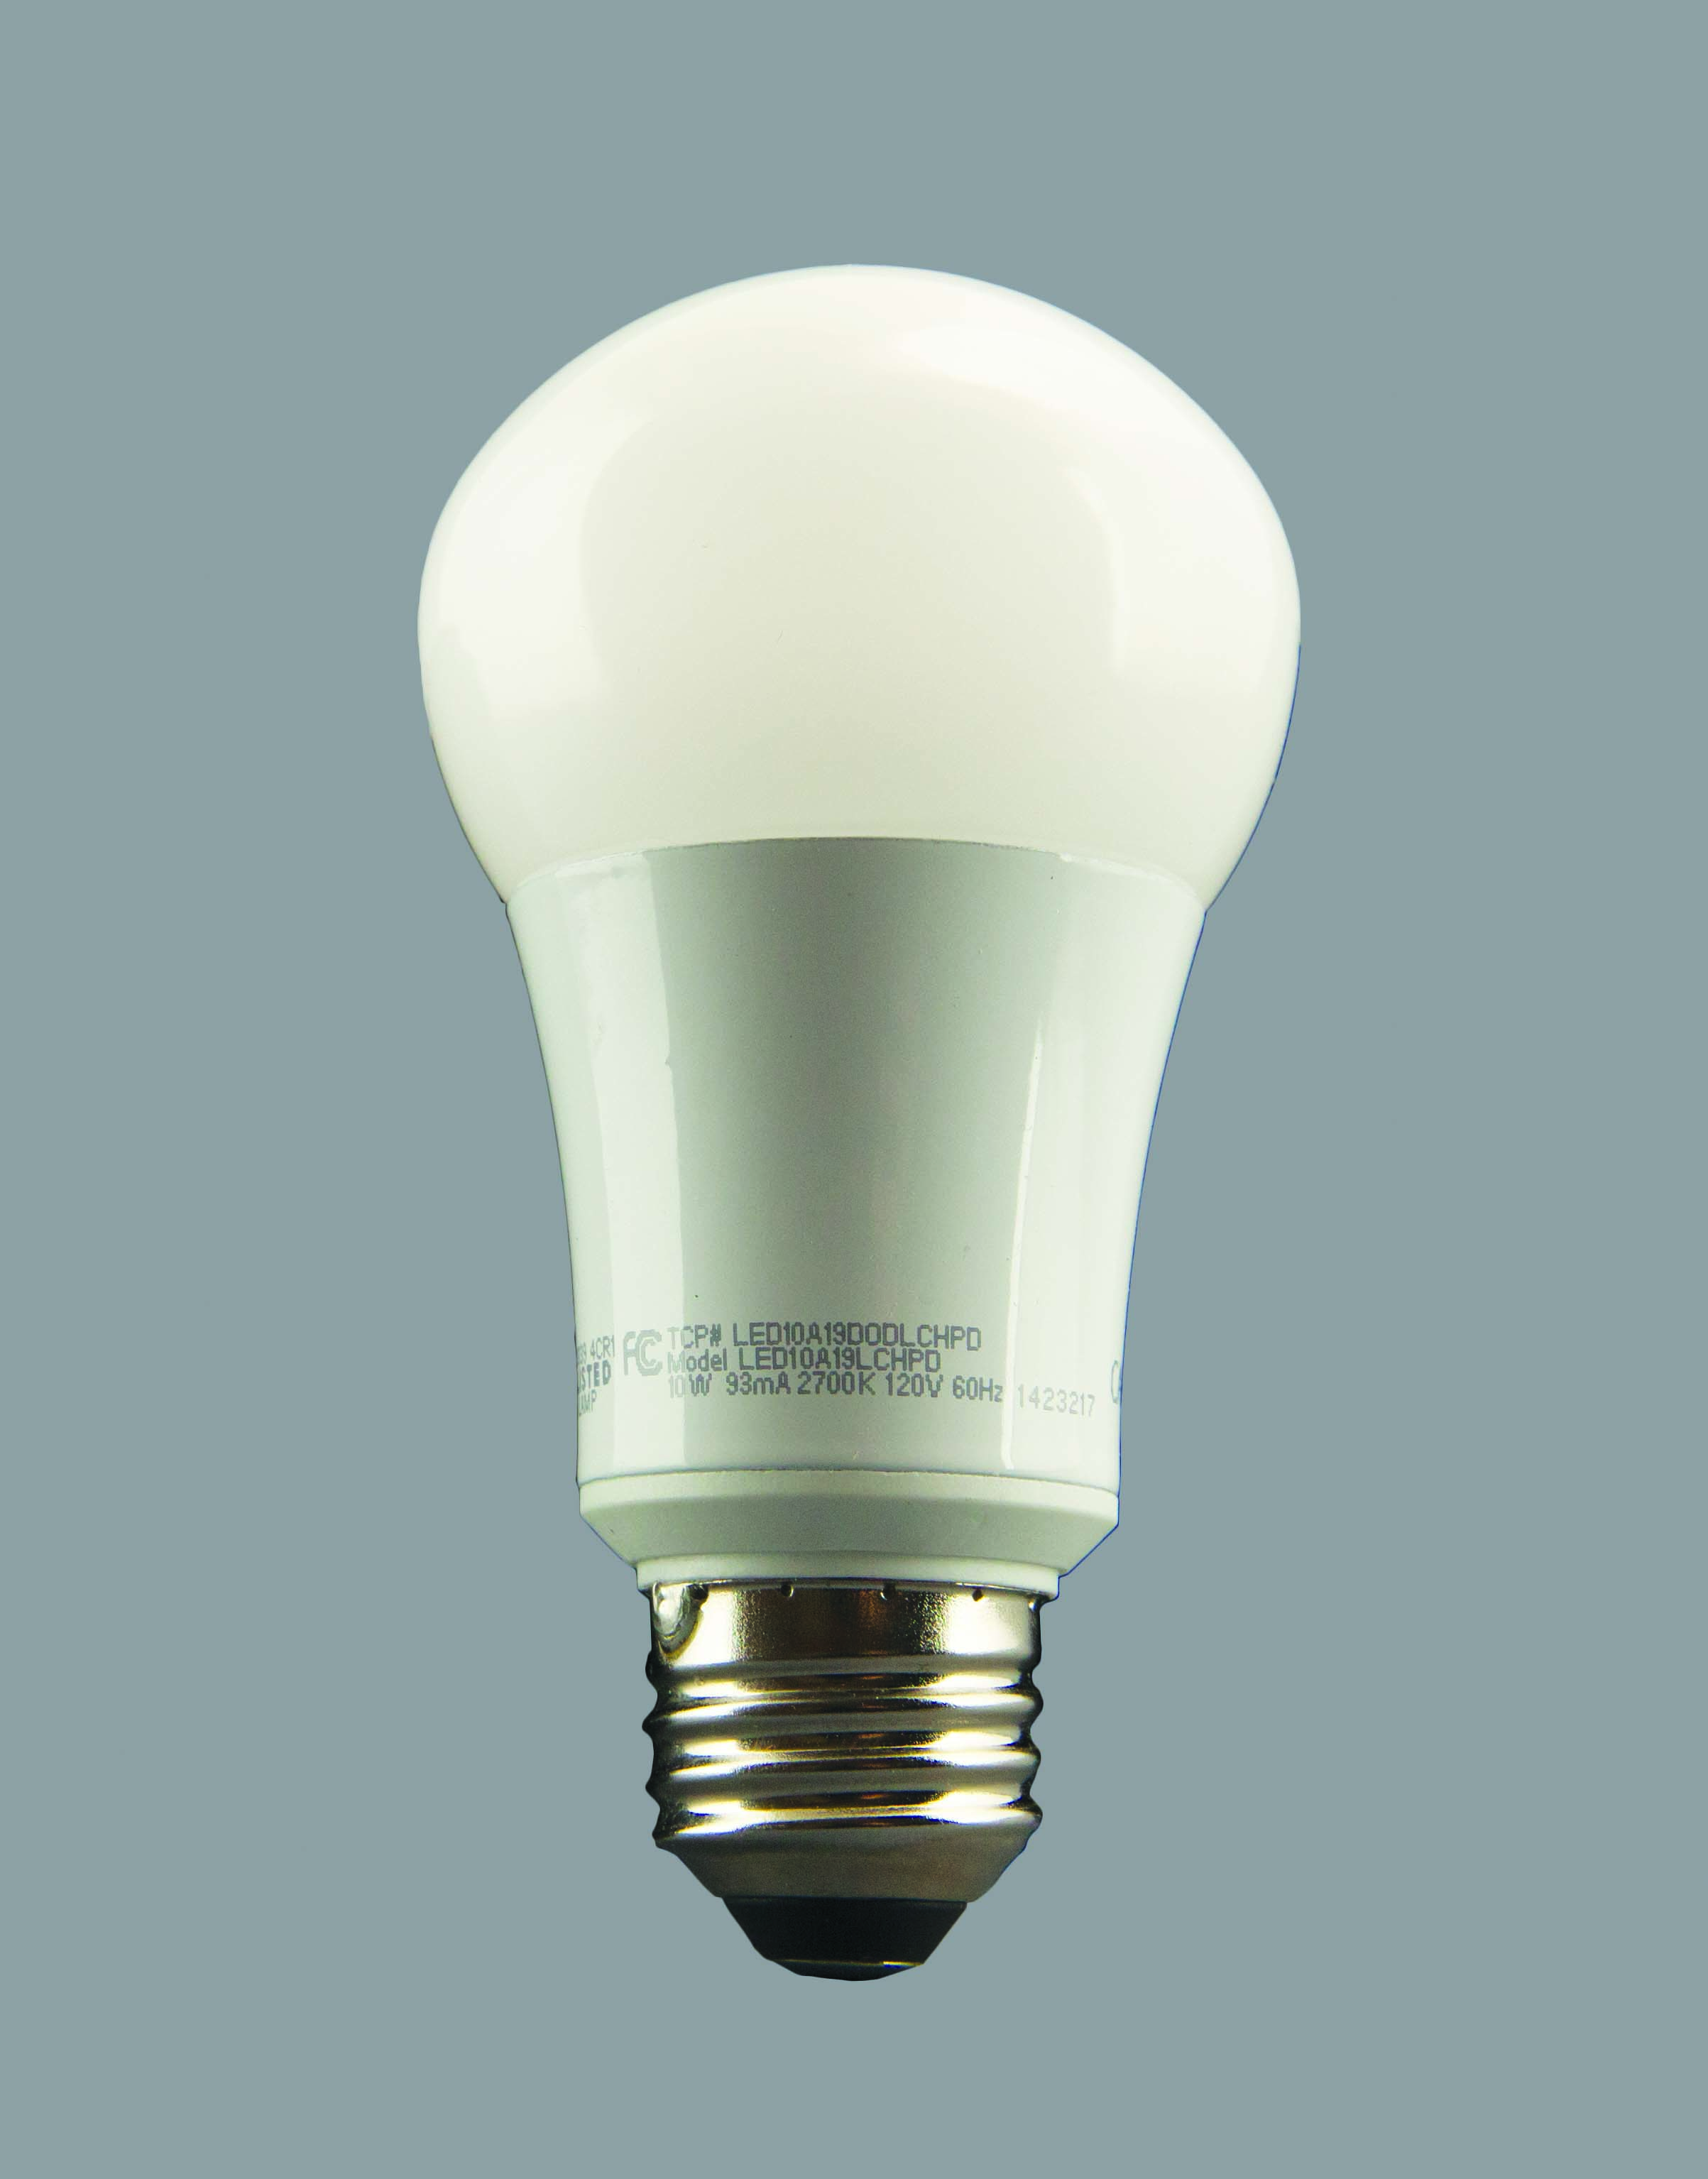 Technical Consumer Products (TCP) LED lamps